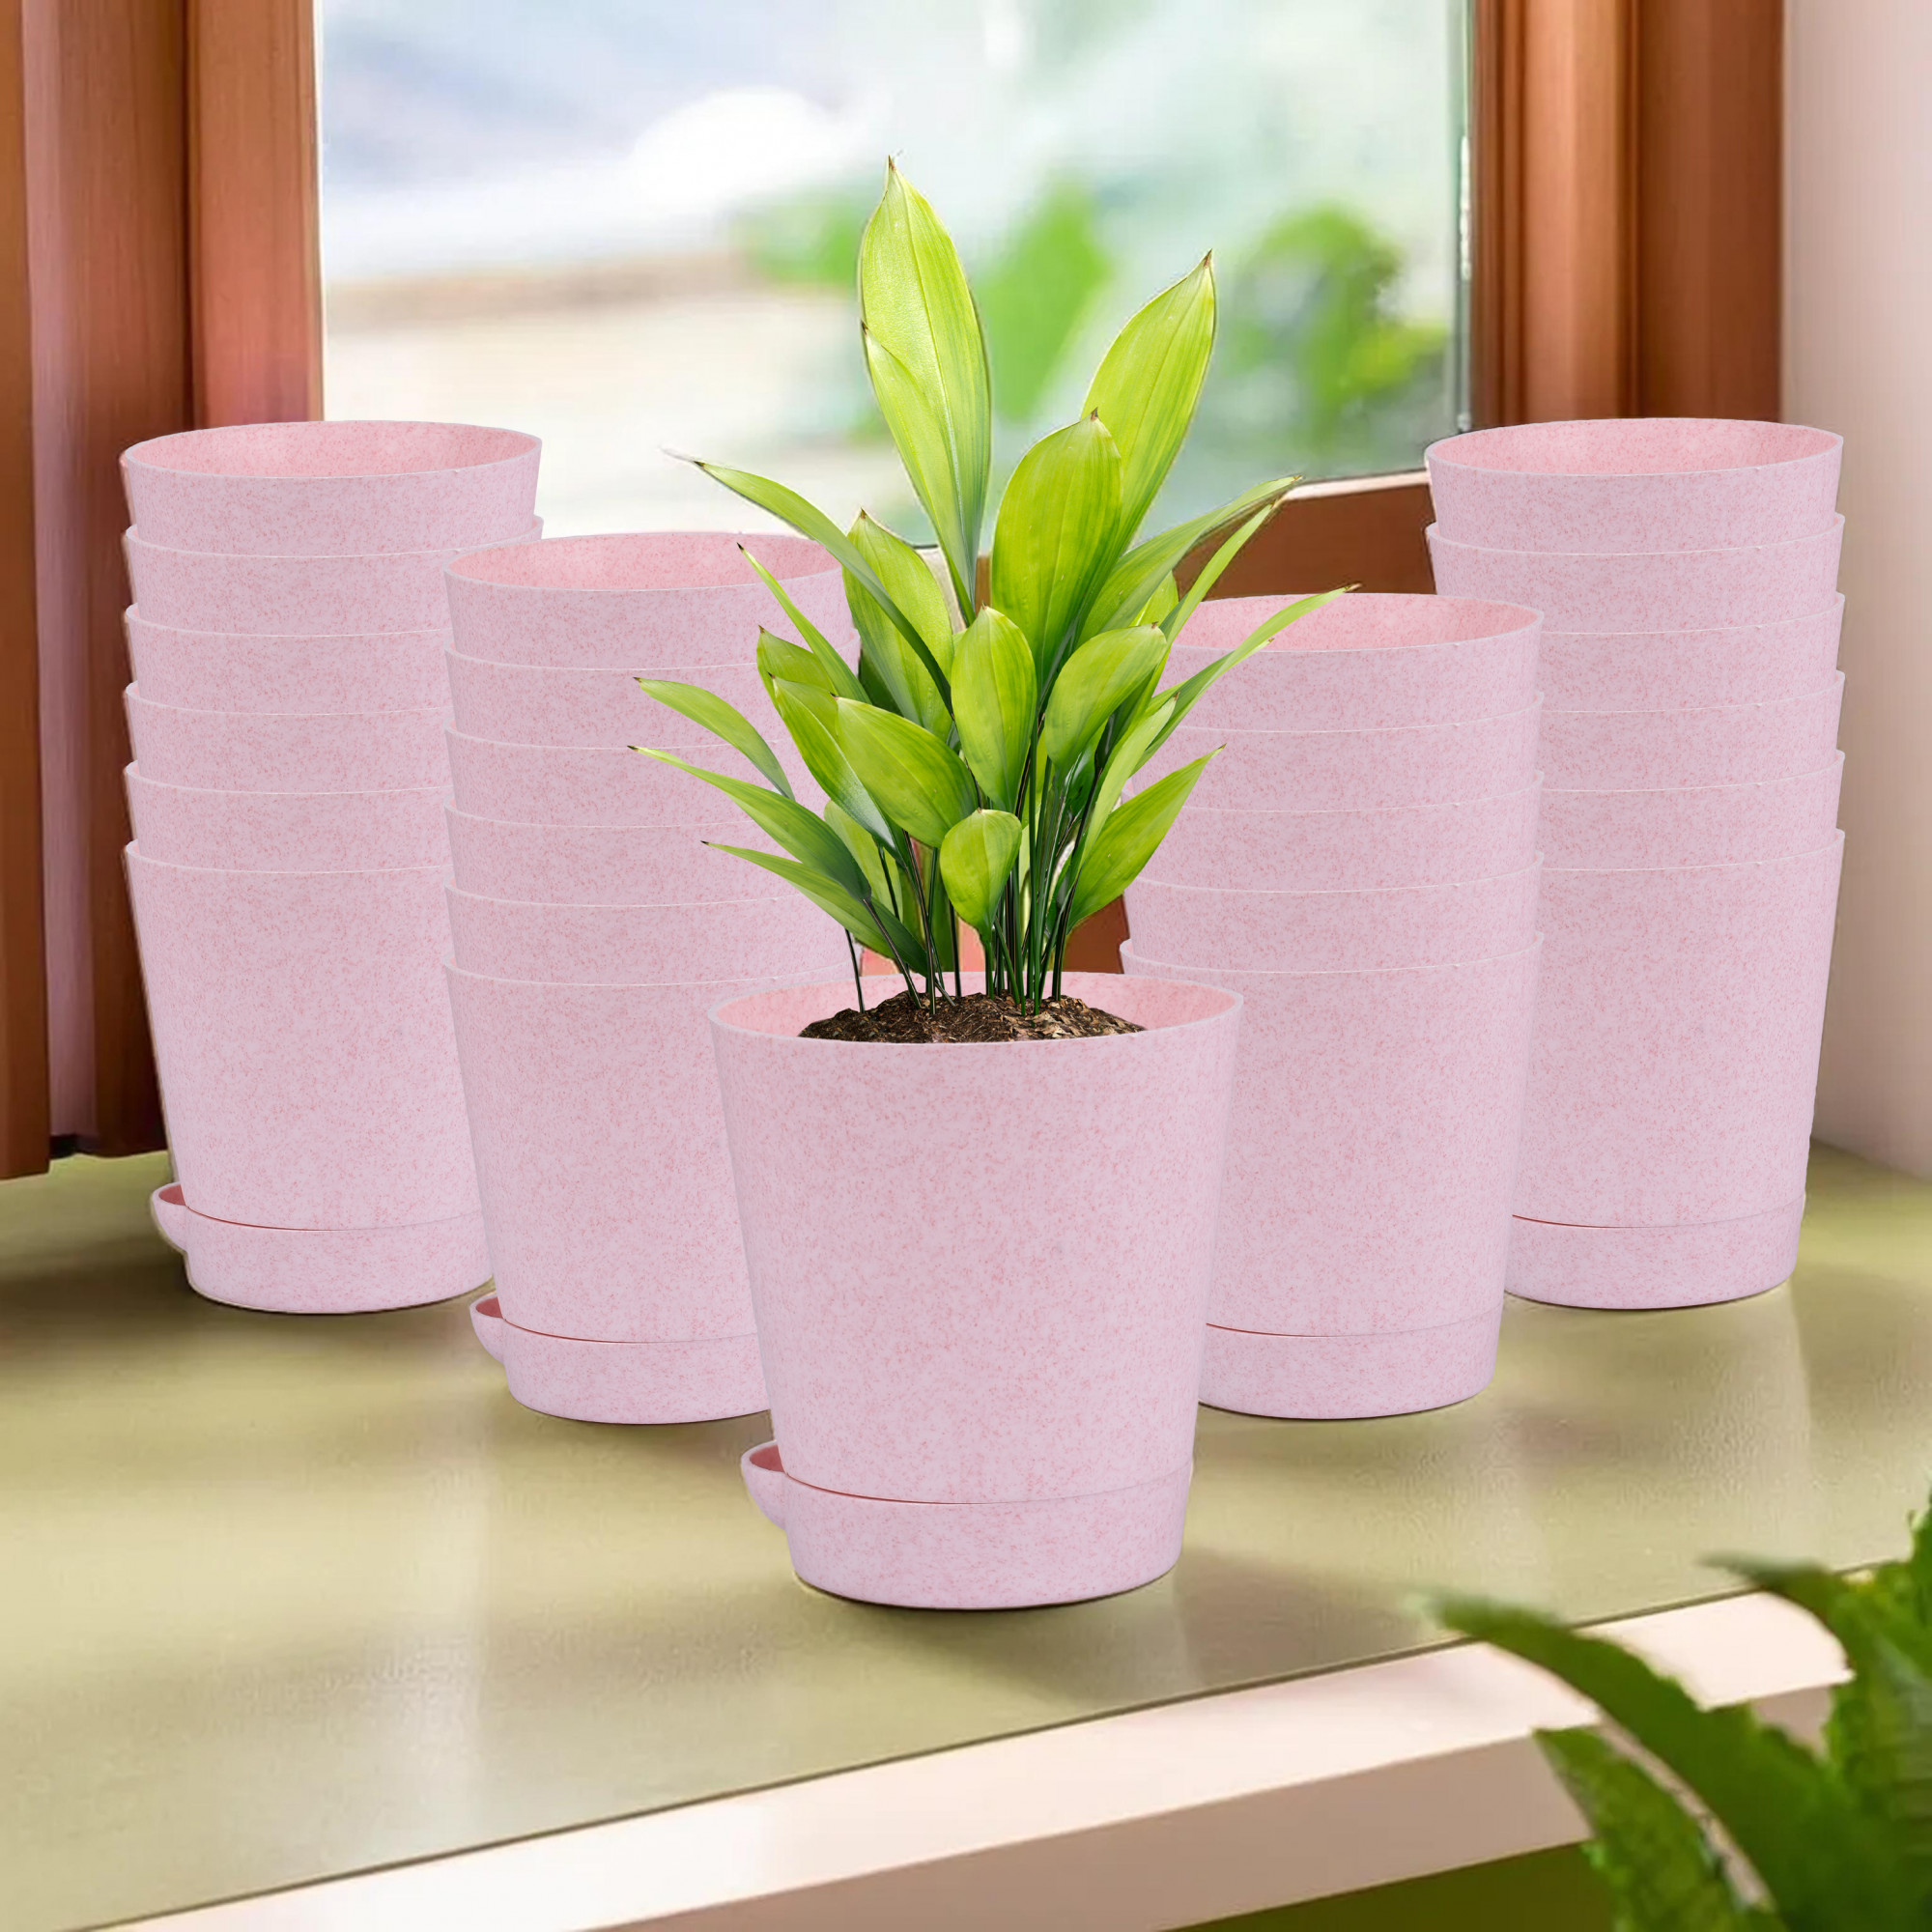 Kuber Industries Flower Pot | Flower Pot for Living Room-Office | Flower Planters for Home-office-Lawns & Garden Décor | Self Watering Flower Planters Pots | Marble Titan | 4 Inch | Pink